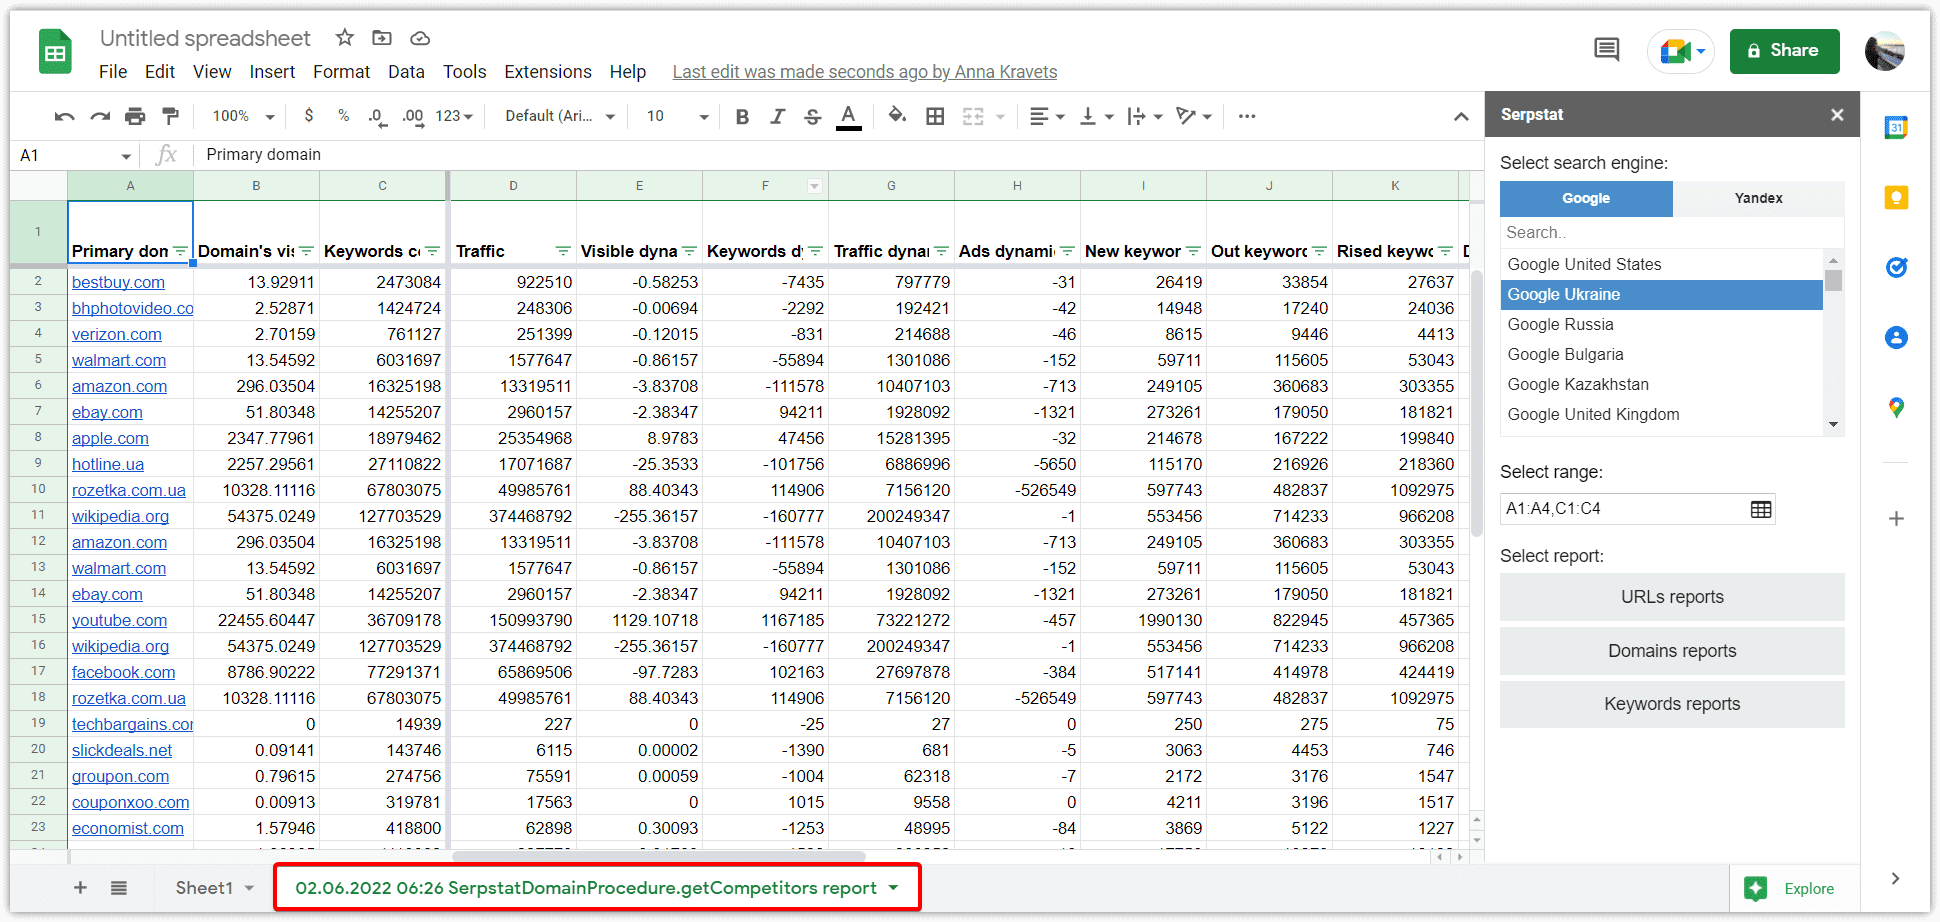 A report is generated in a new table sheet